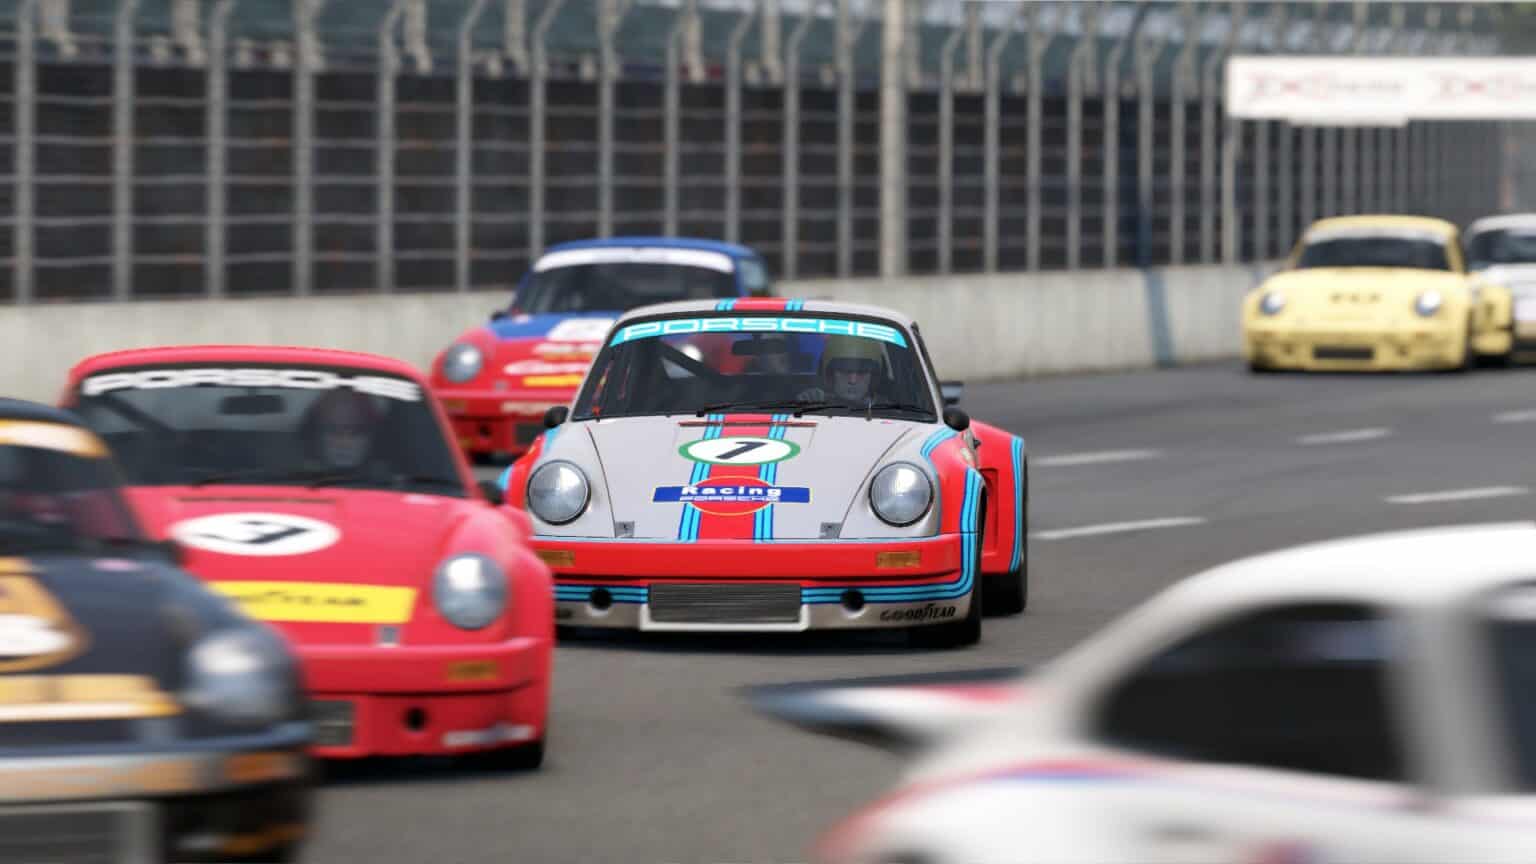 Salvador street circuit and classic Porsche added to